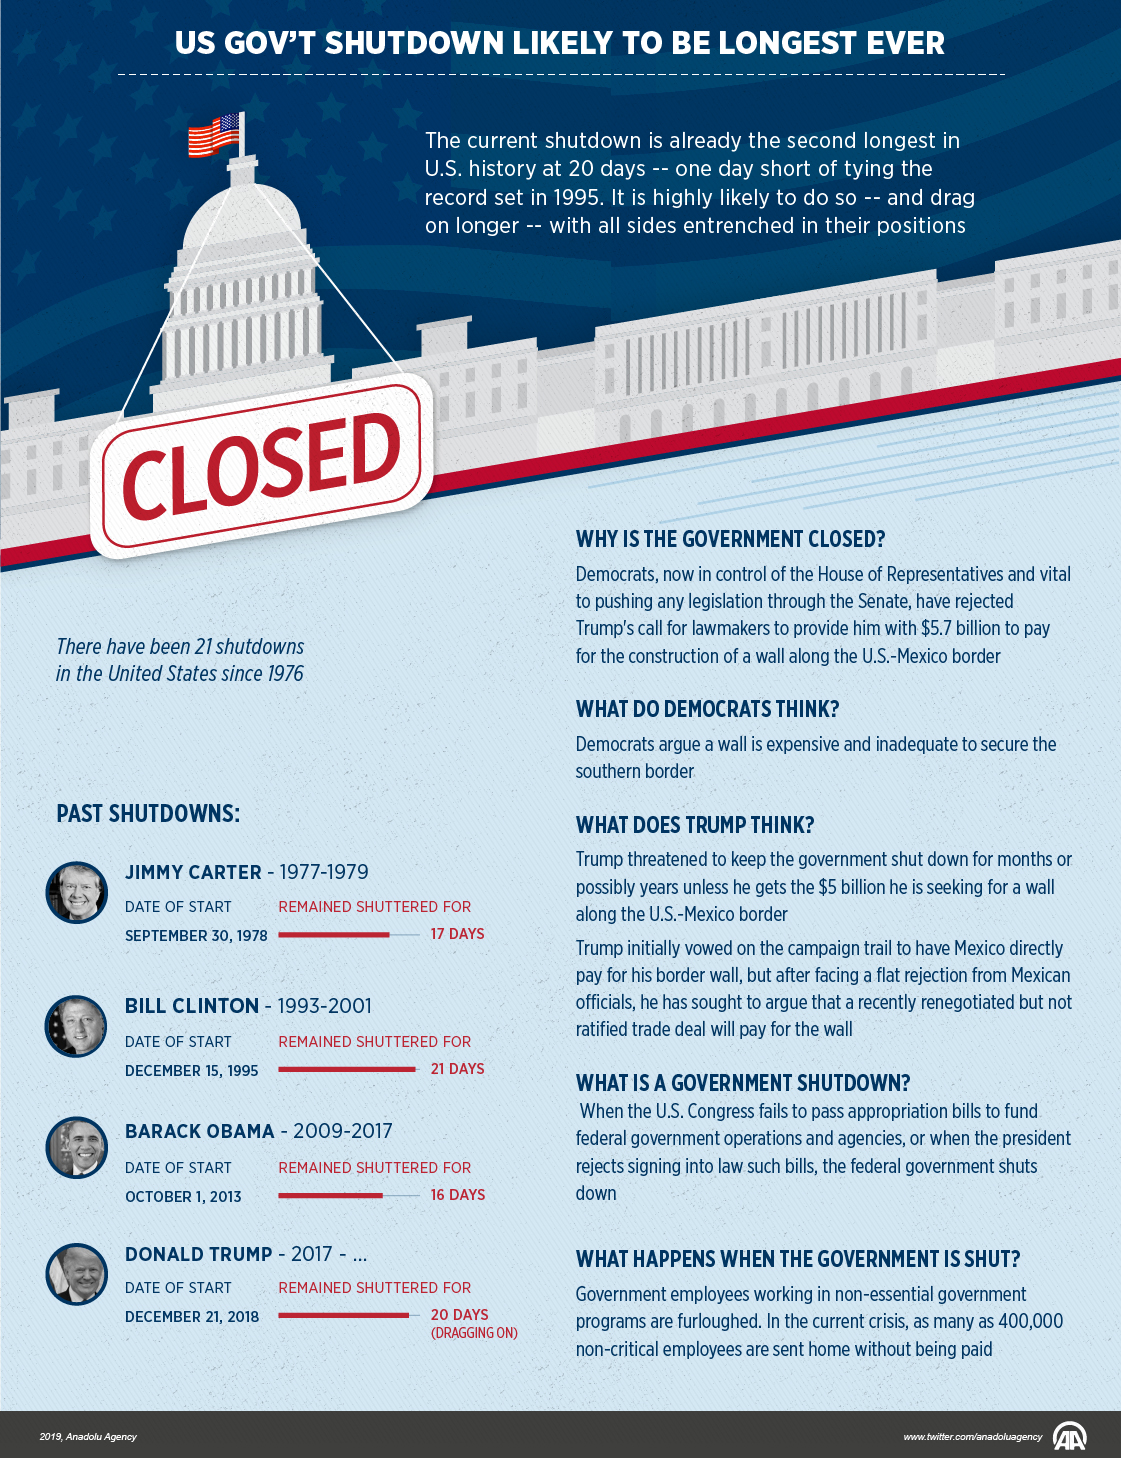 US gov’t shutdown likely to be longest ever